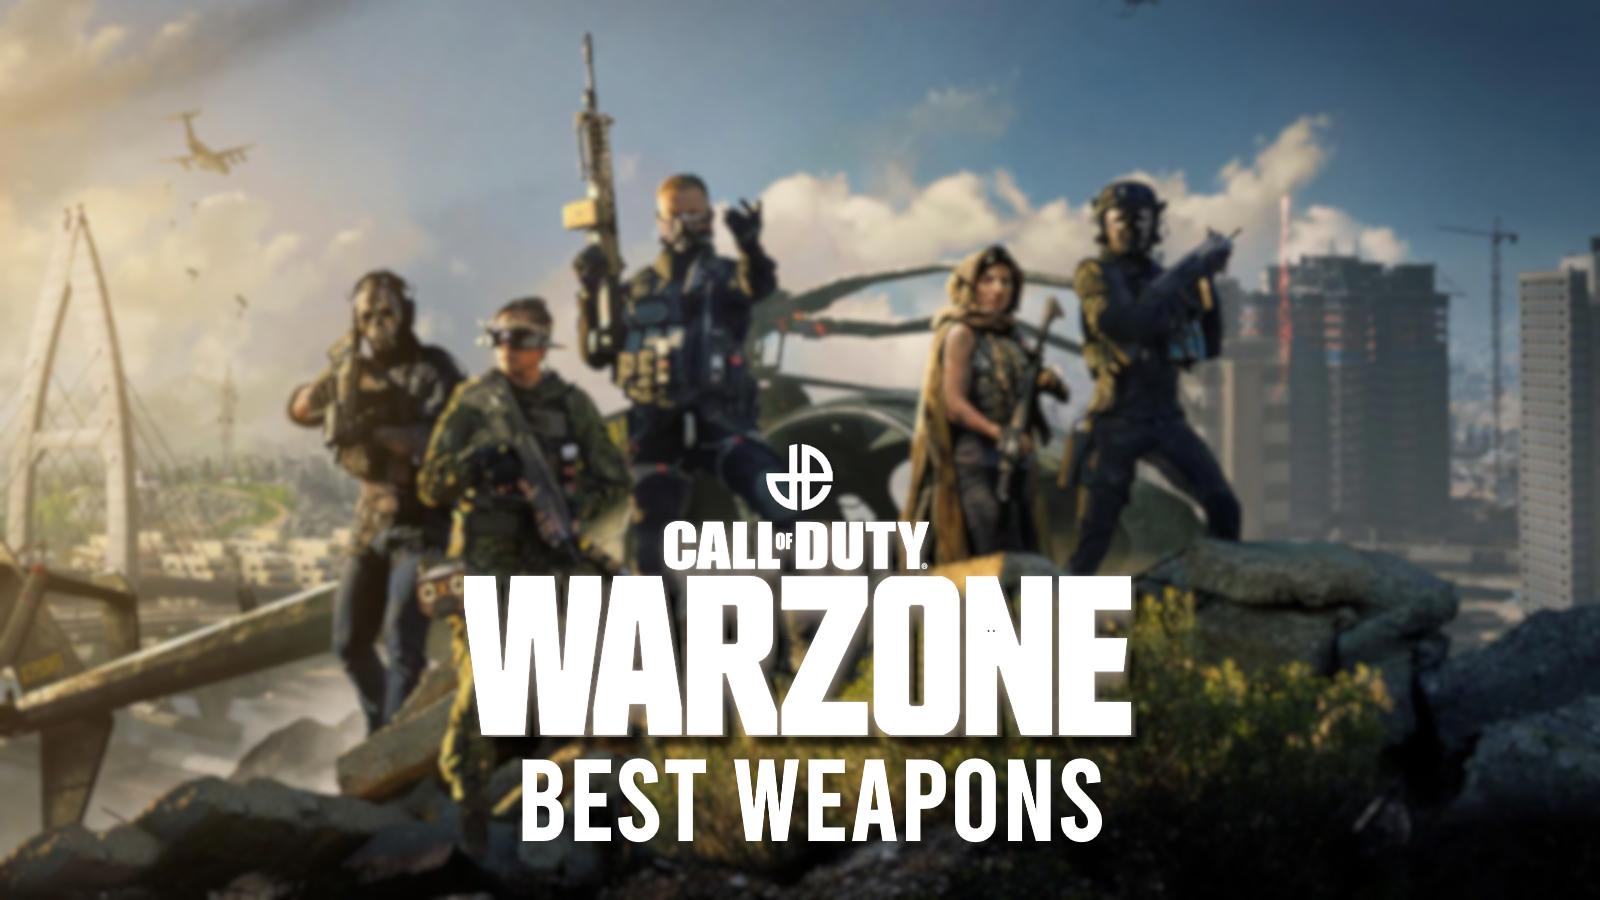 warzone and dexerto logo above best weapons subheader in front of blurred promo art.